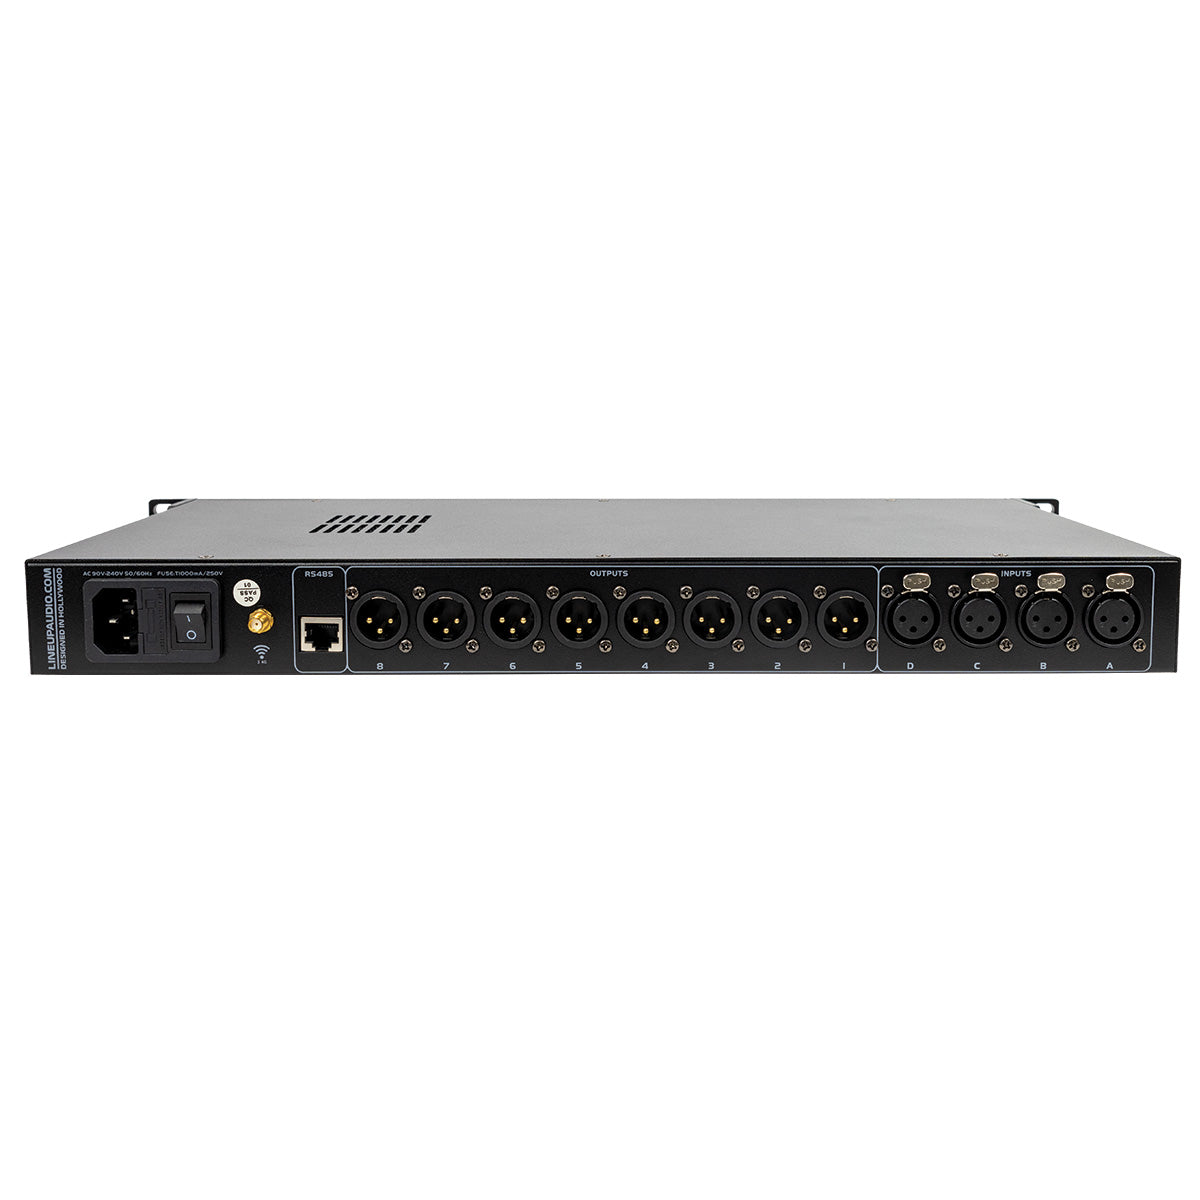 Absolute Audio Control DSP Processor with Wireless Connectivity 4 IN / 8 OUT GALLIARD48